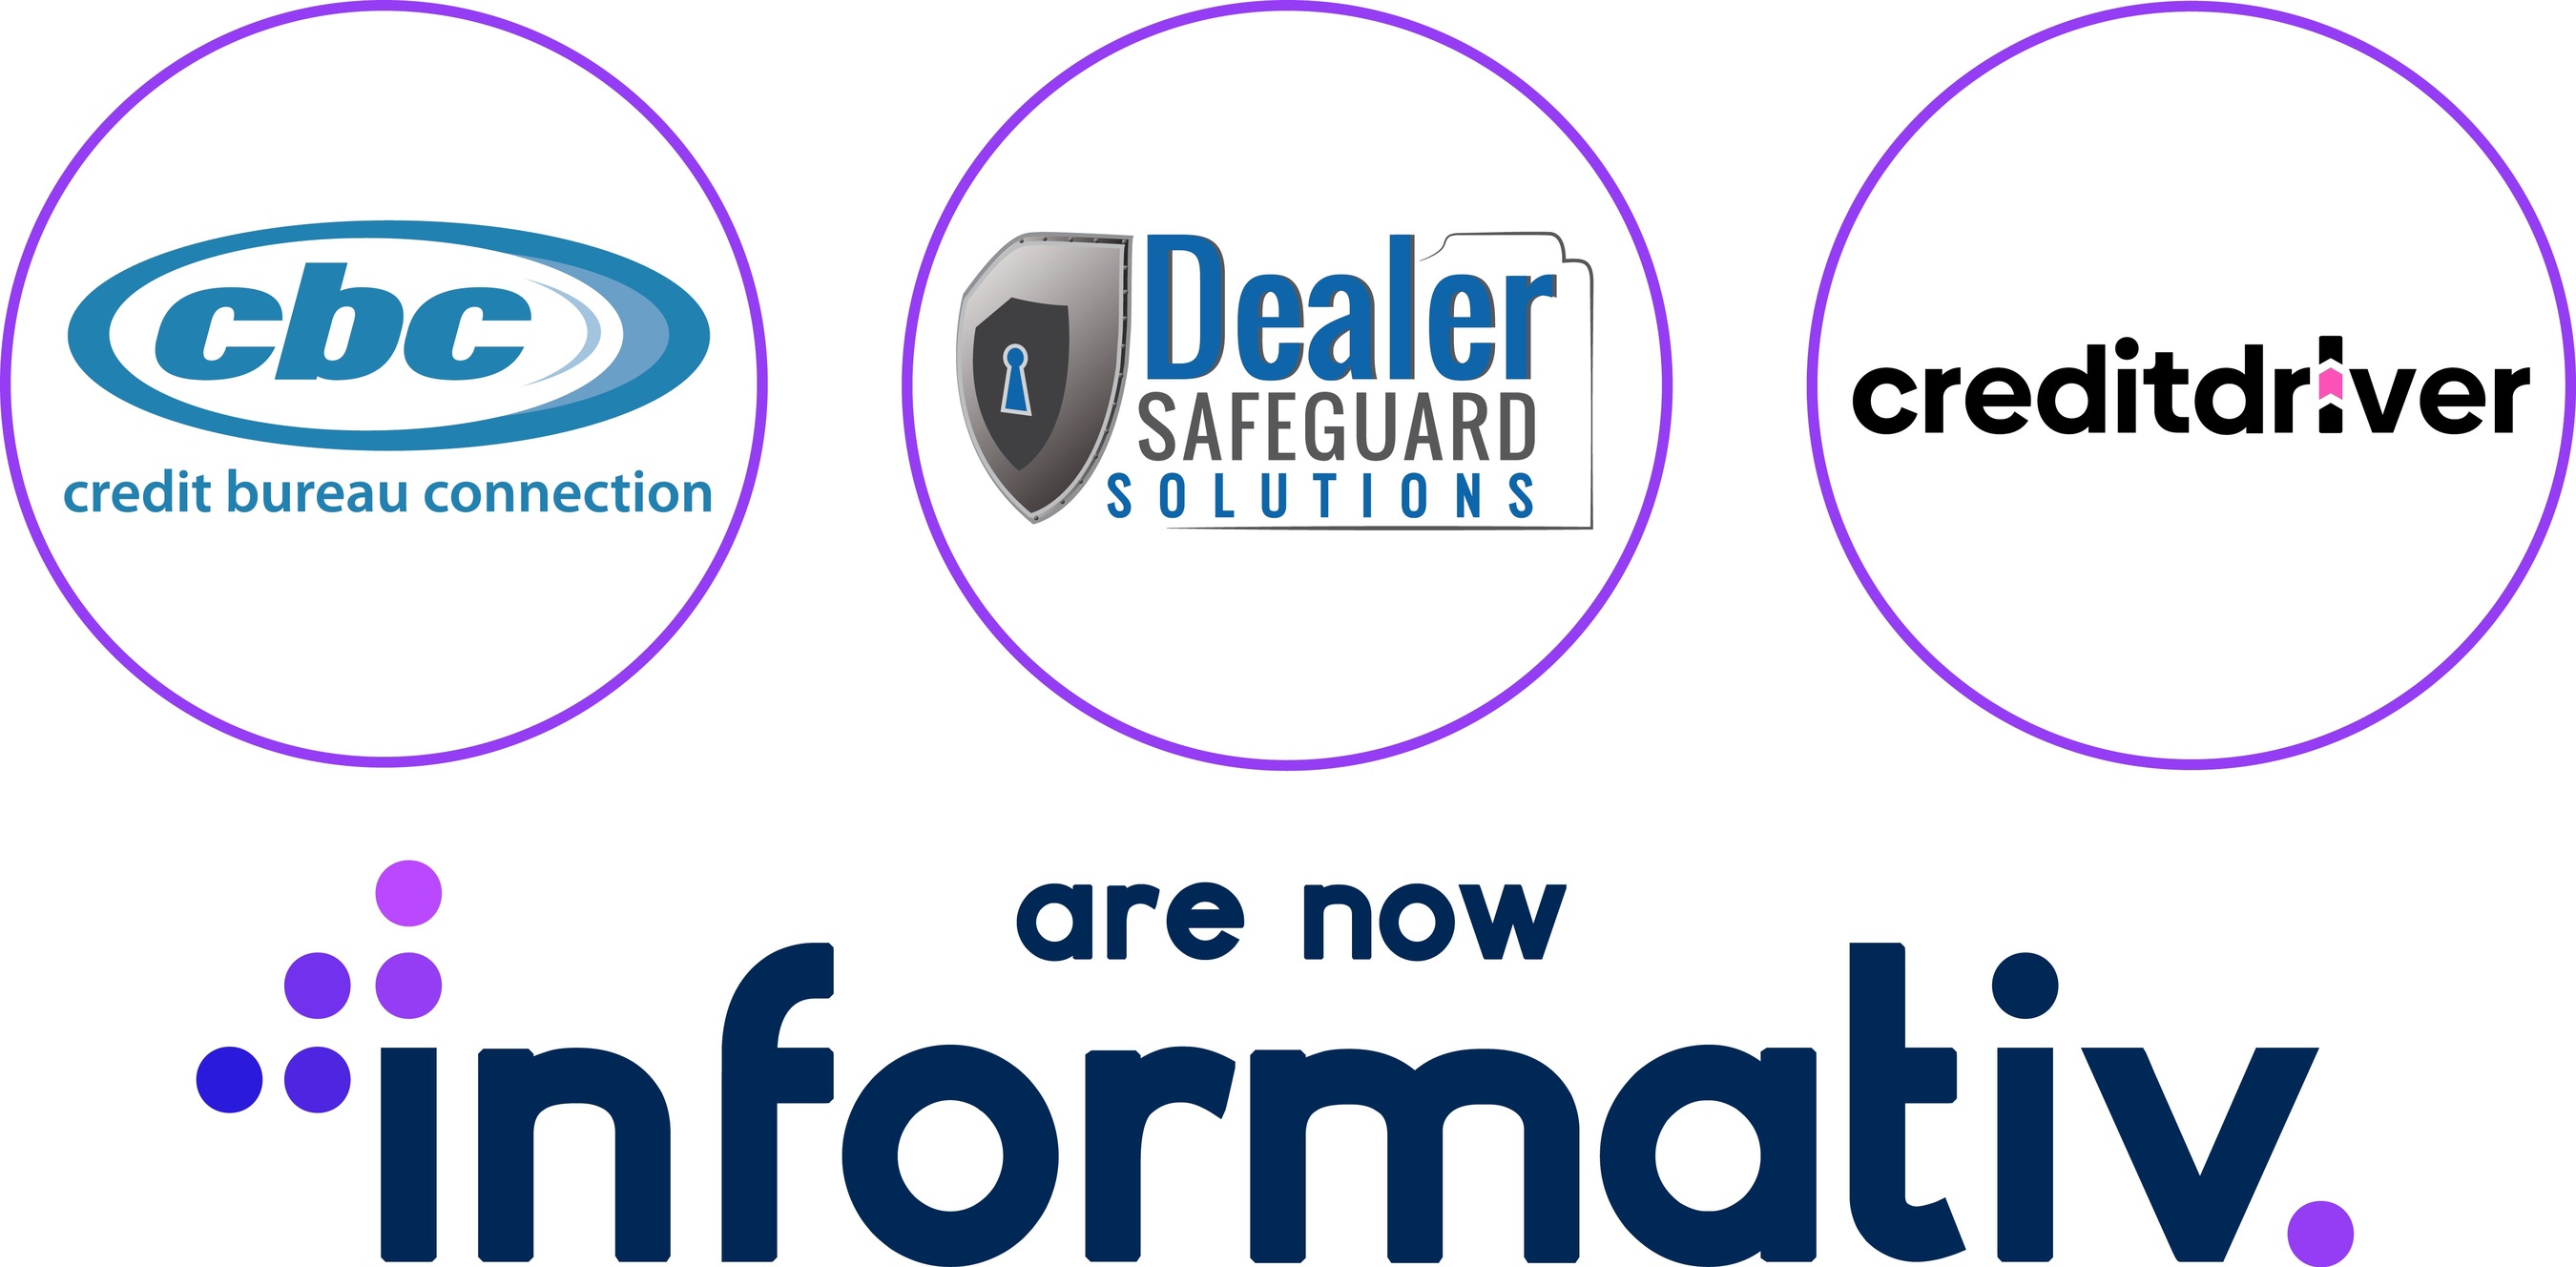 Leading Credit & Compliance Partners Credit Bureau Connection, Dealer Safeguard Solutions & CreditDriver Are Now Powered by Informativ